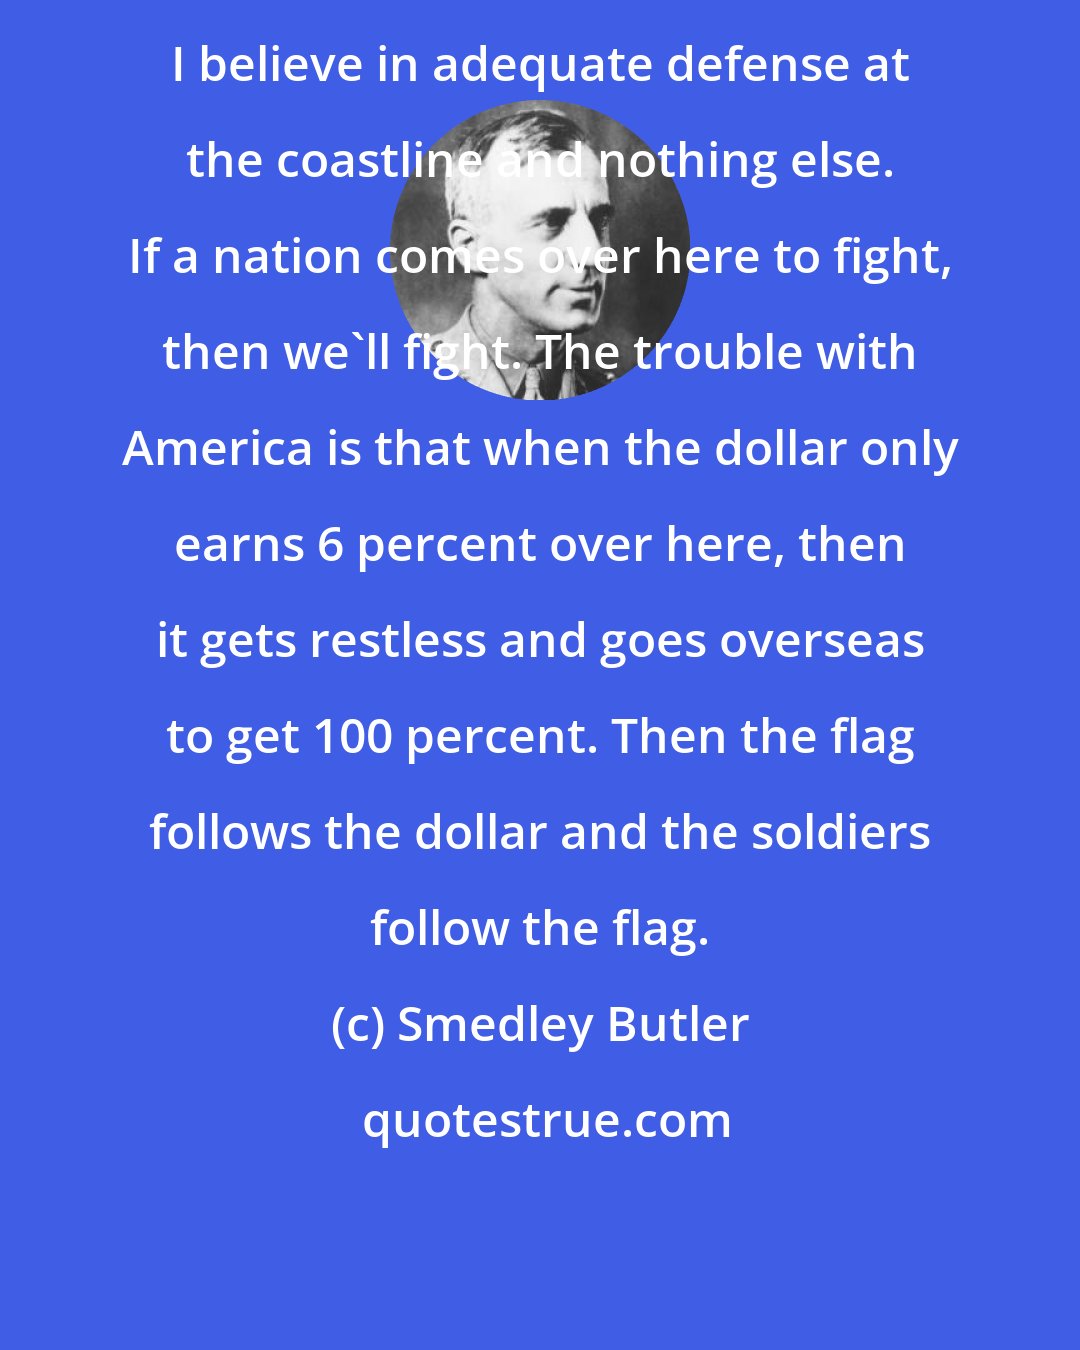 Smedley Butler: I believe in adequate defense at the coastline and nothing else. If a nation comes over here to fight, then we'll fight. The trouble with America is that when the dollar only earns 6 percent over here, then it gets restless and goes overseas to get 100 percent. Then the flag follows the dollar and the soldiers follow the flag.